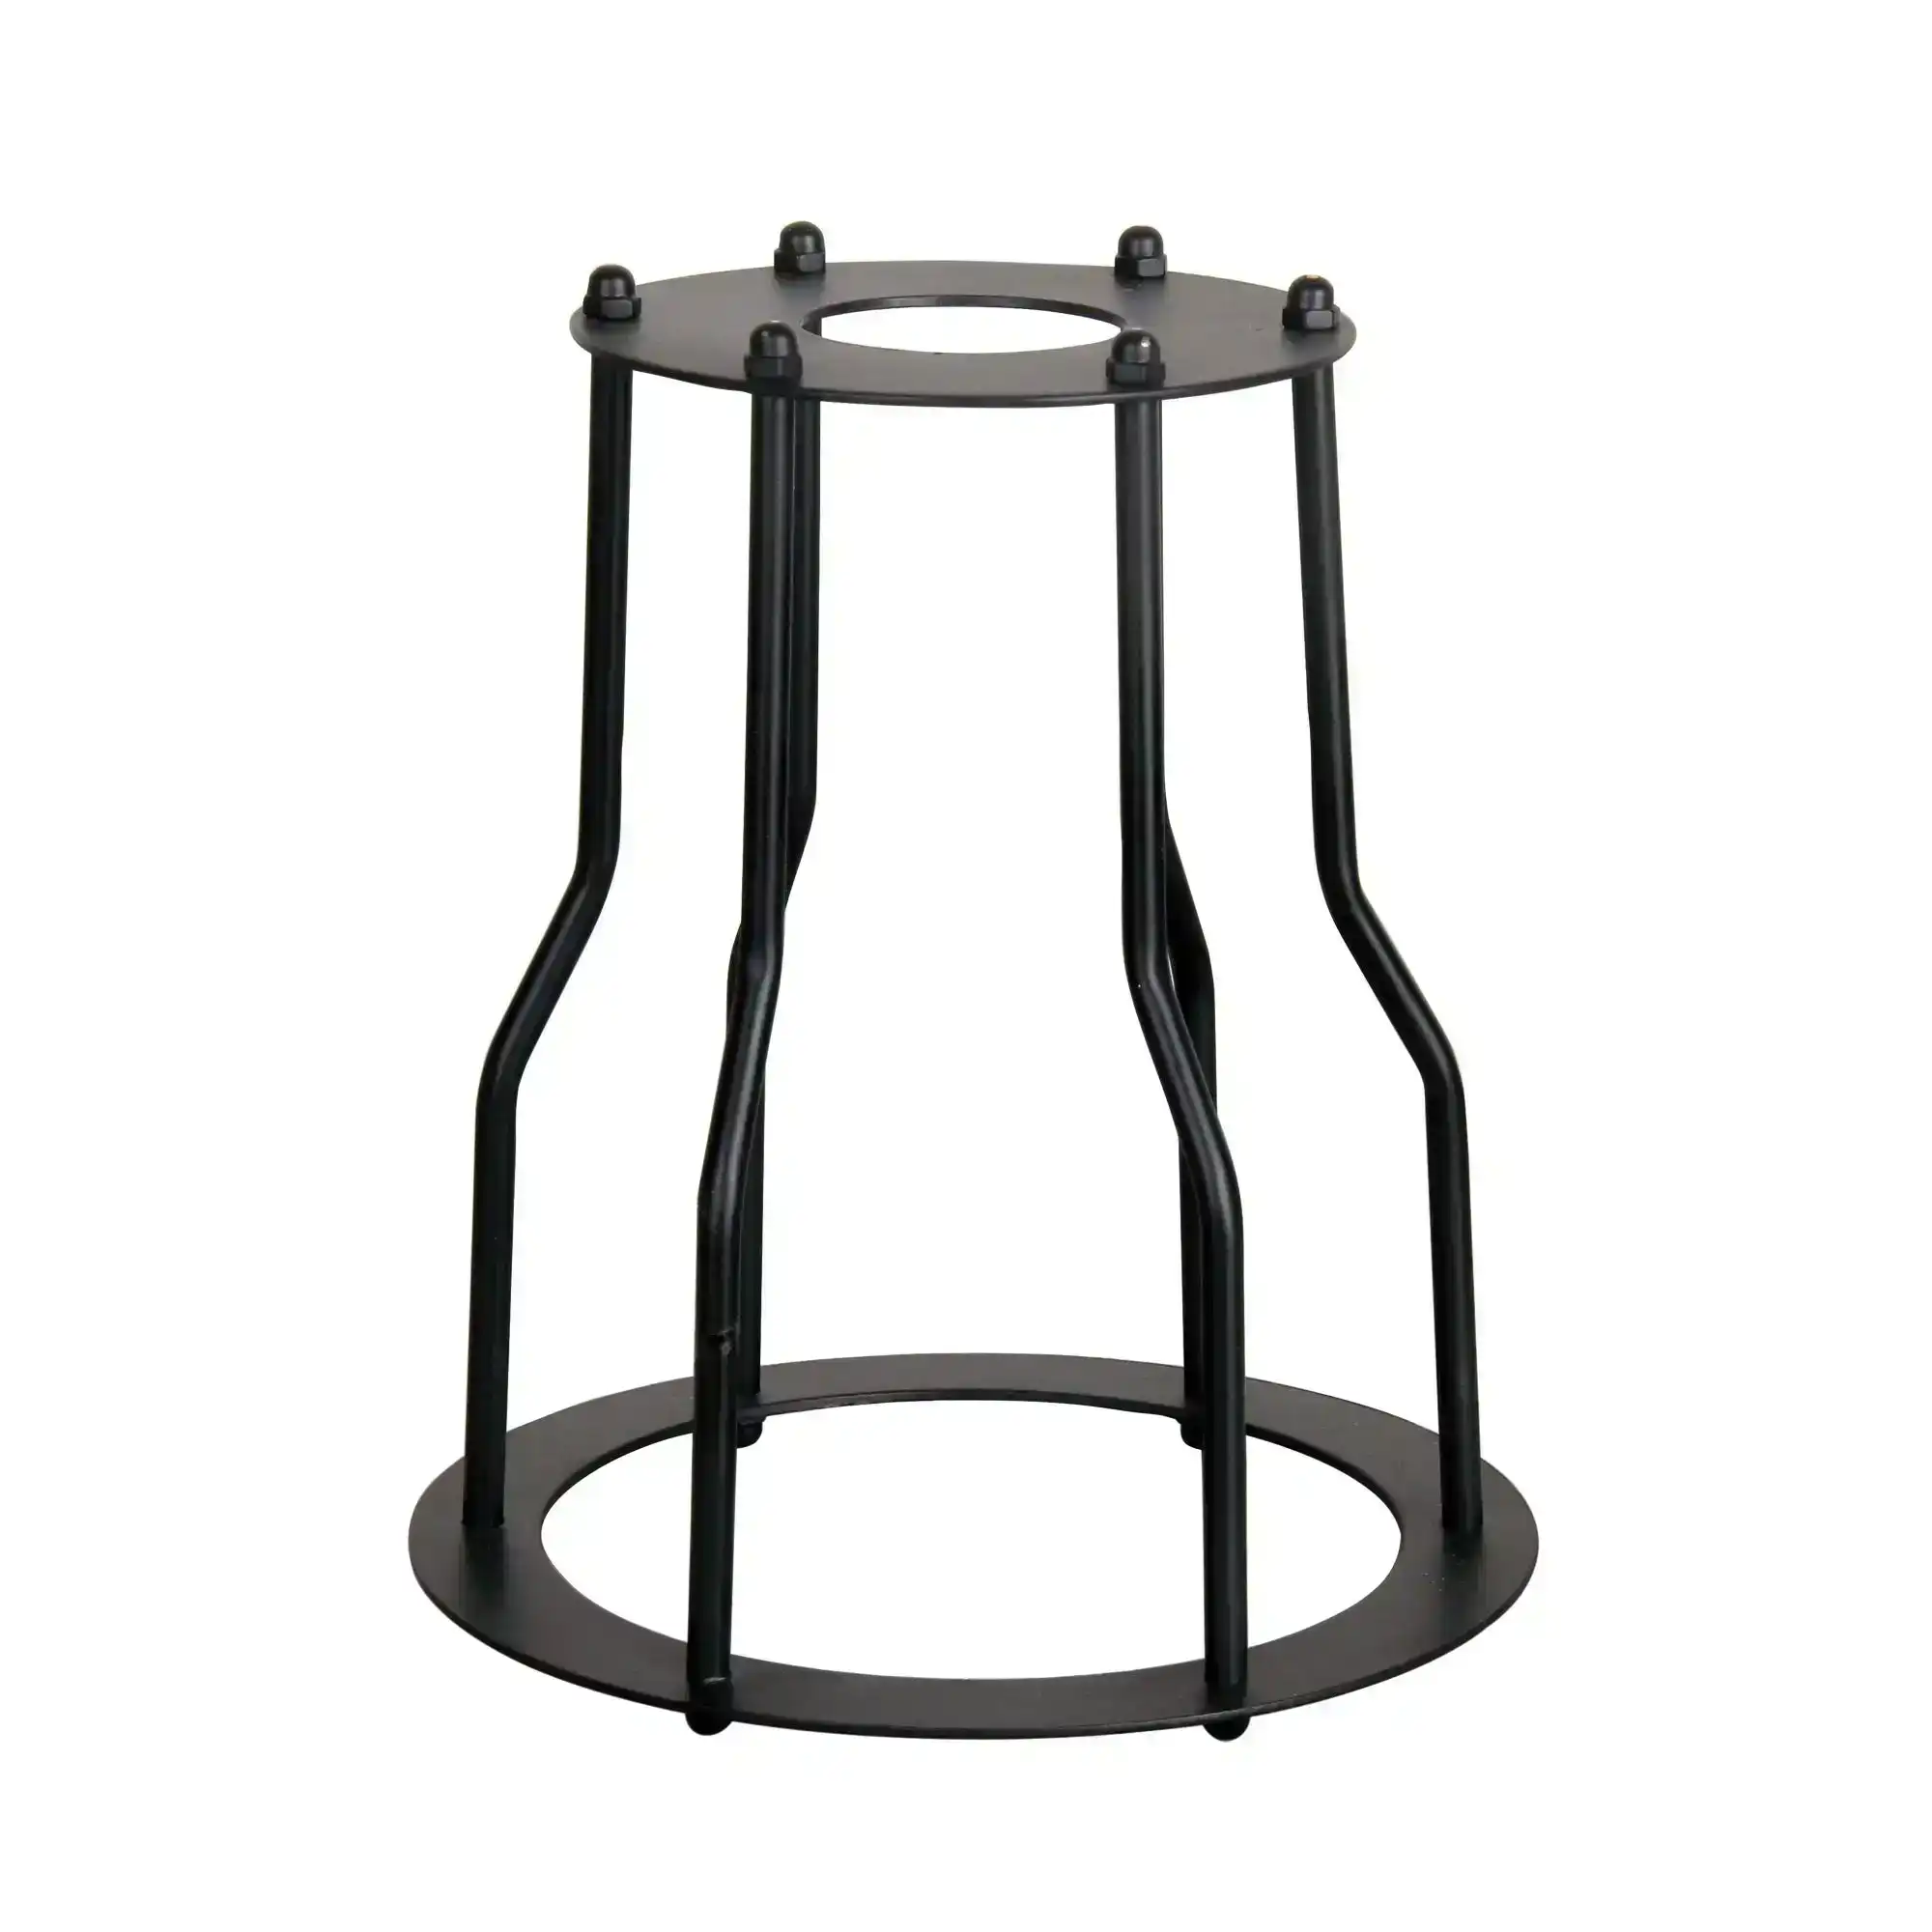 CAGE.18 Pendant Light 18cm Metal Wire Industrial Style Shade